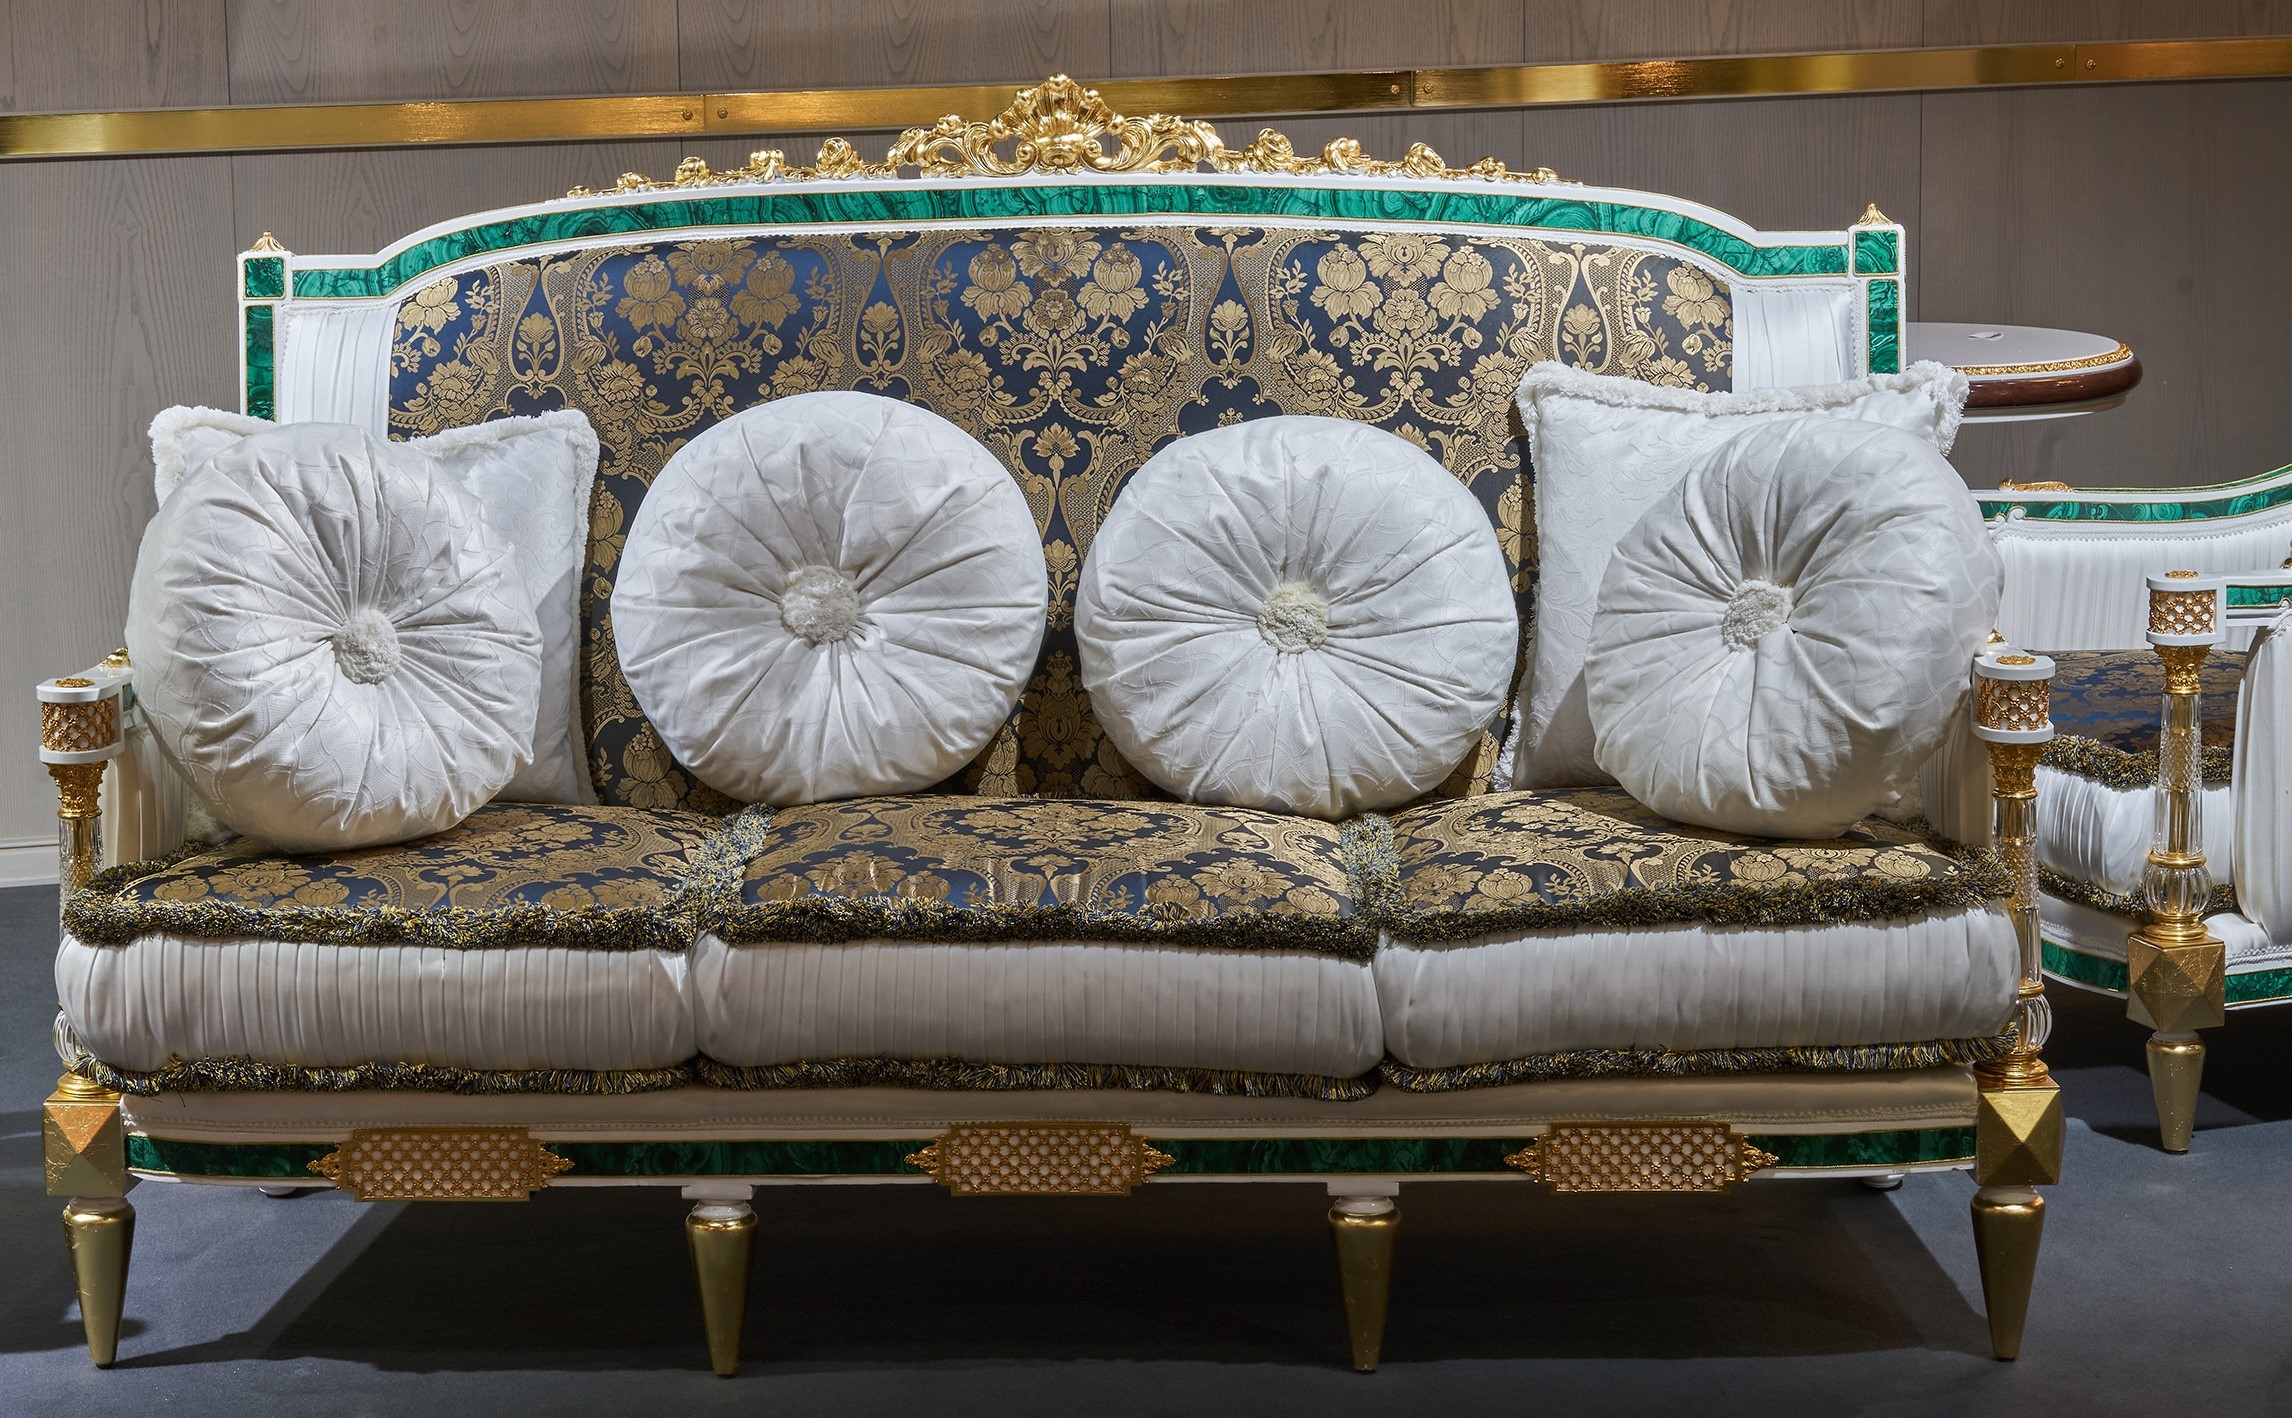 SOFA, COUCH & LOVESEAT Luxuriously Detailed Sapphire and Golden Sofa from our furniture showpiece collection. 7362